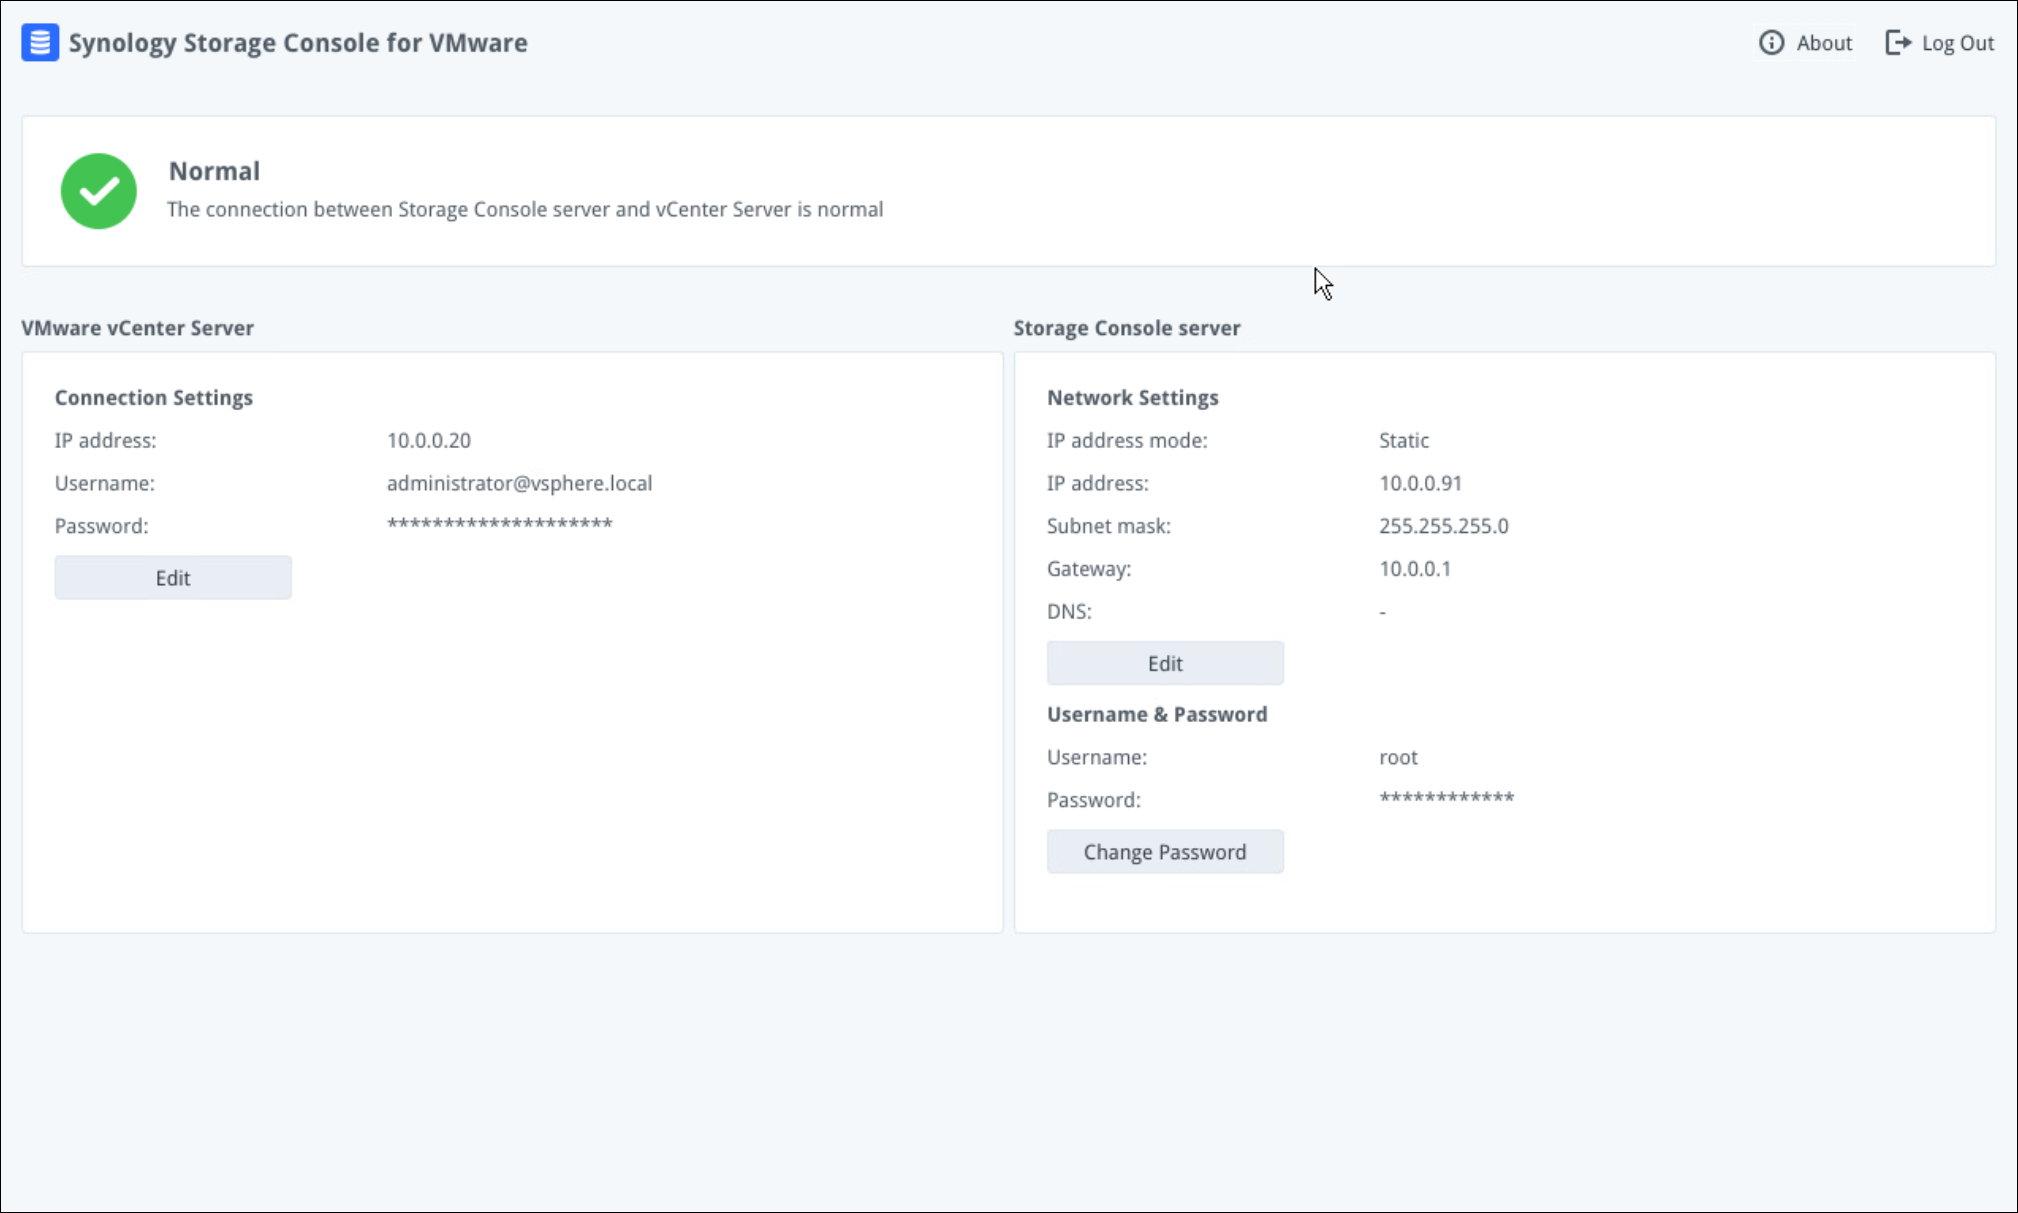 Virtual appliance configuration screen for the Synology Storage Console for VMware 